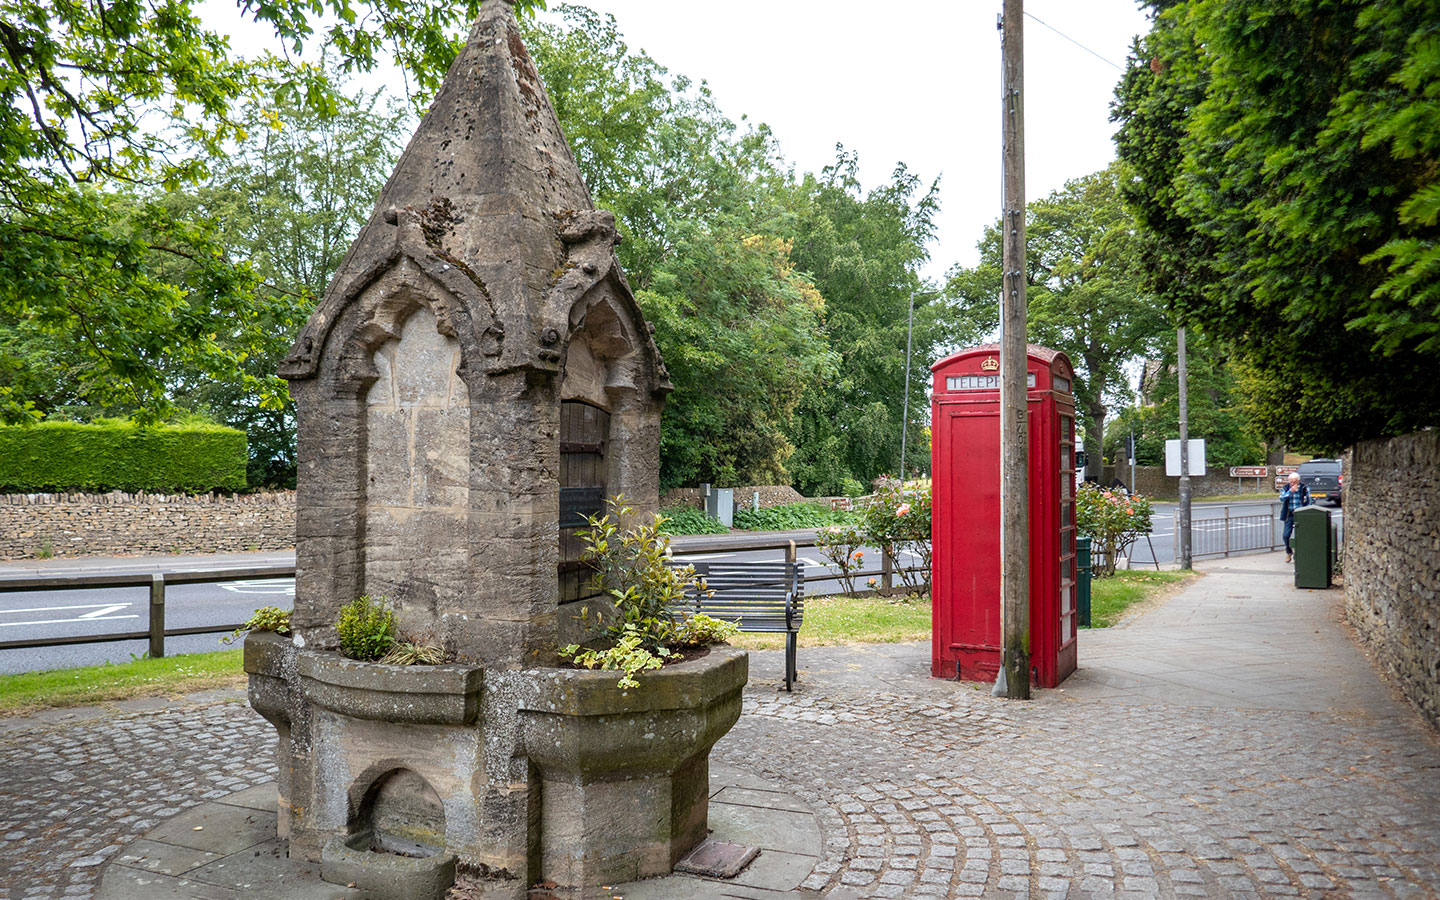 The Stow-on-the-Wold Fountain